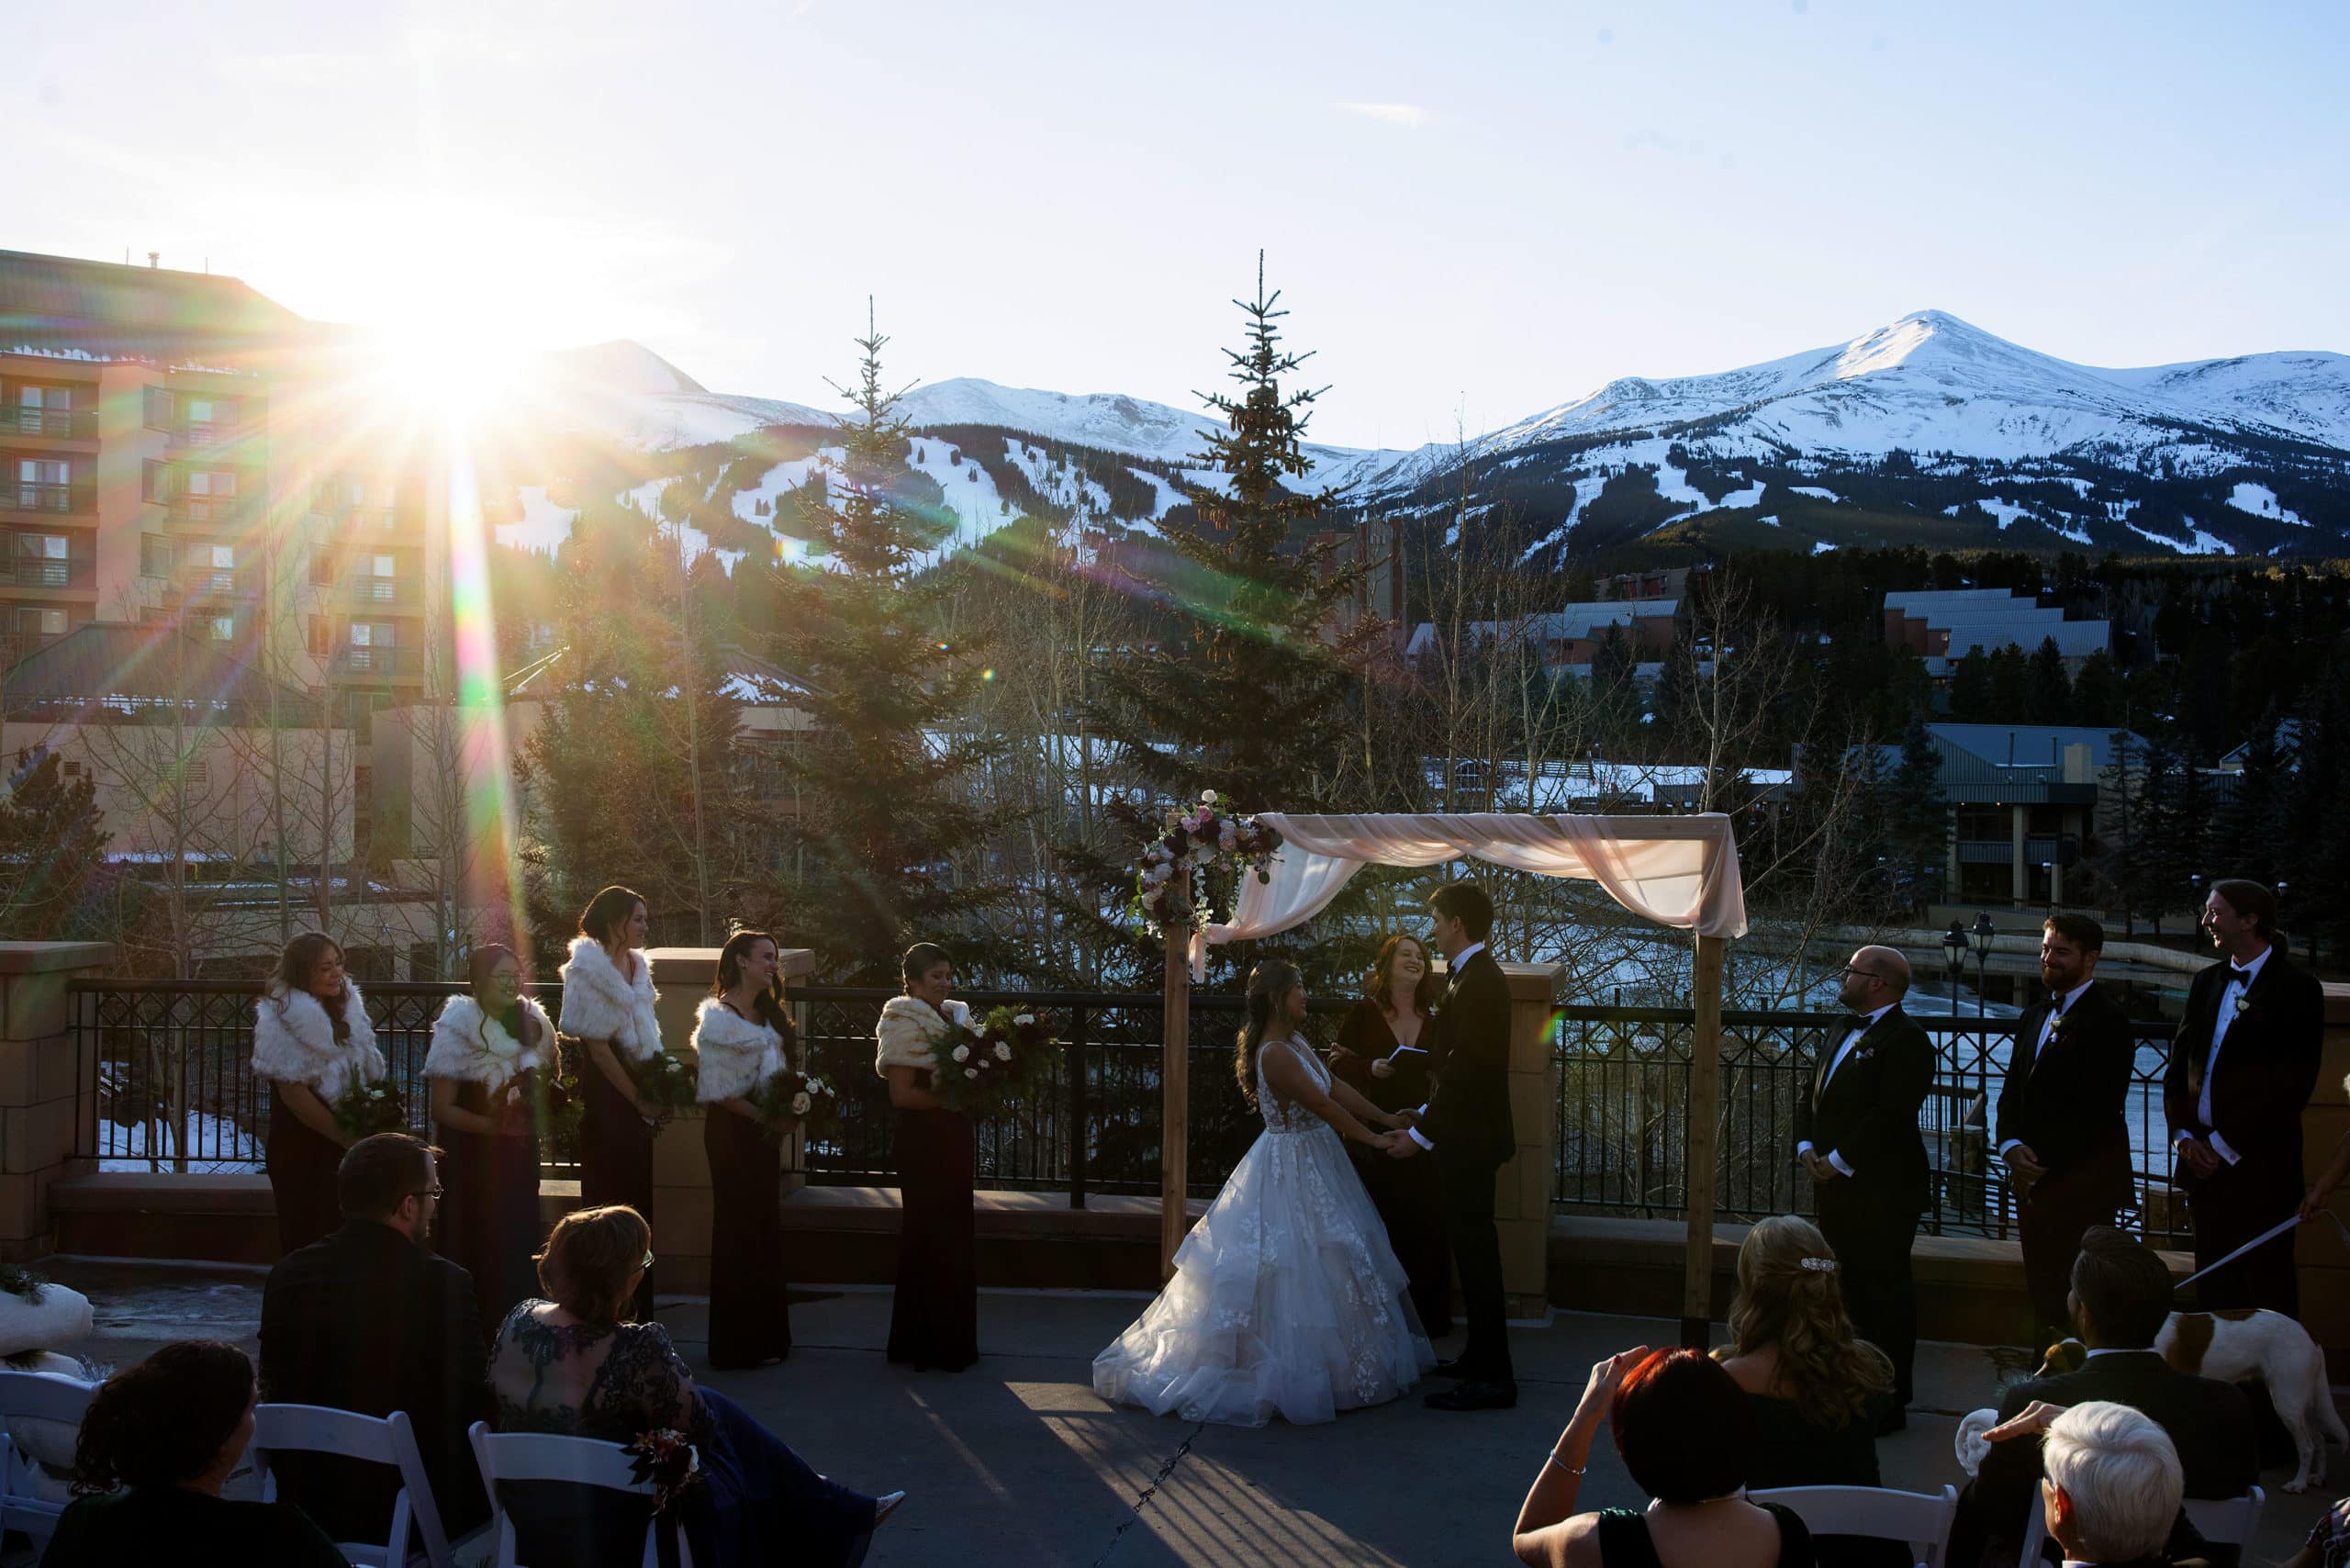 The sun sets over the mountain during a winter wedding ceremony at Main Street Station in Breckenridge